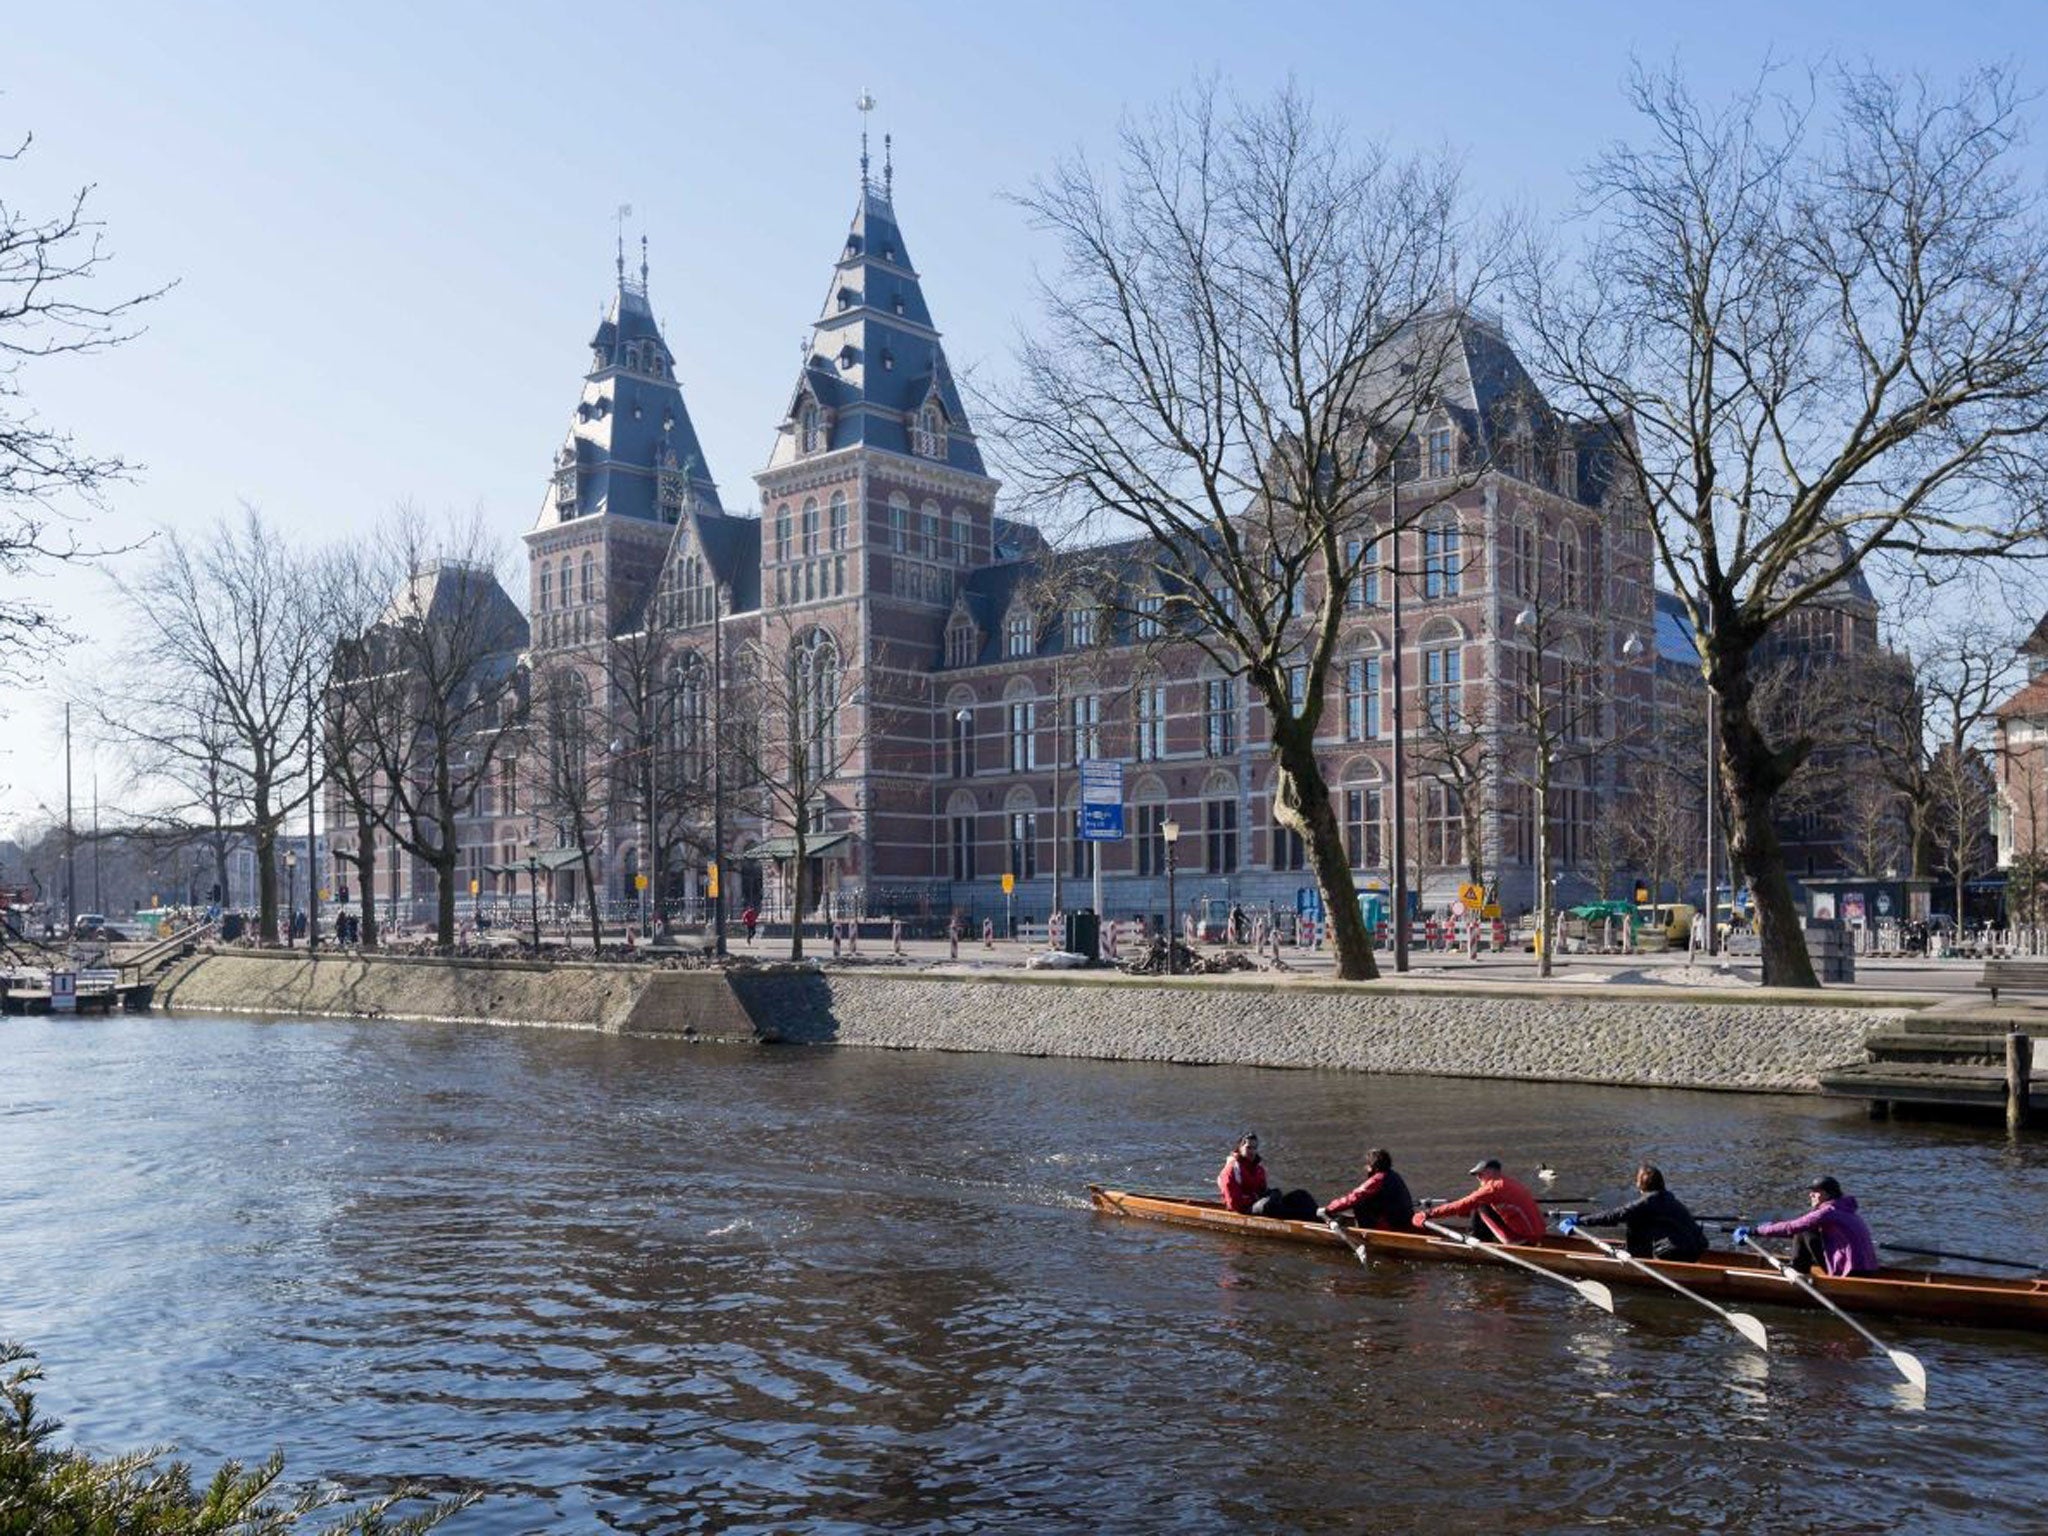 The Rijksmuseum from the canal